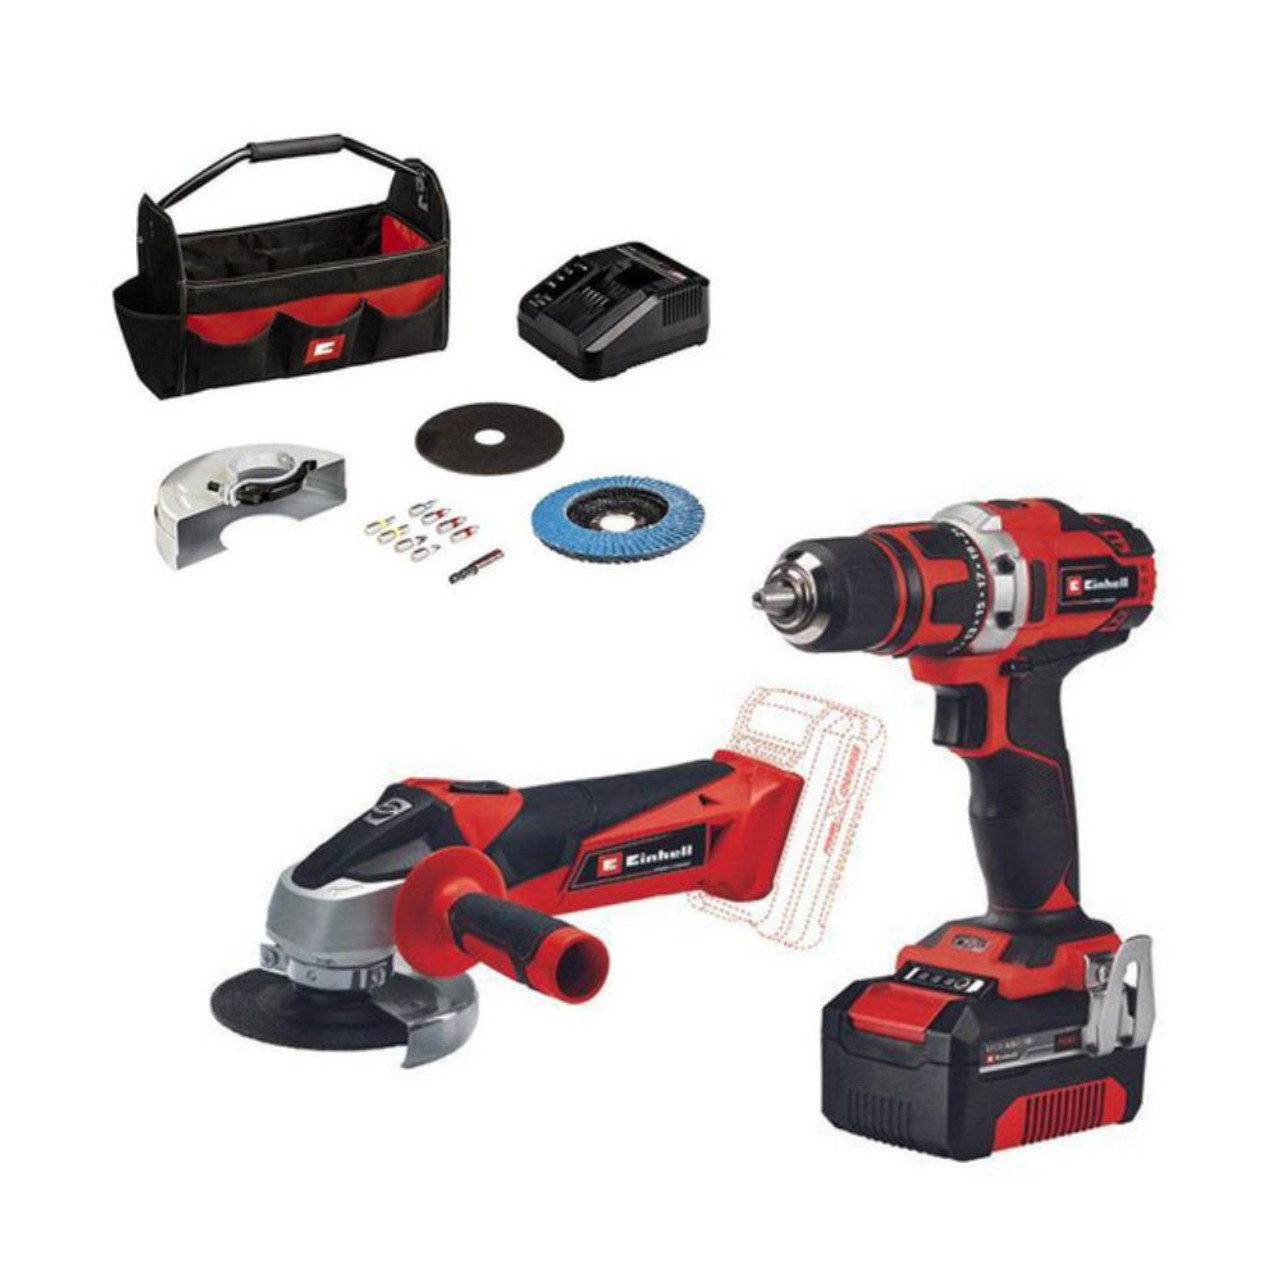 Einhell 18v Power X-Change Cordless Drill & Angle Grinder Twin Pack 4257240